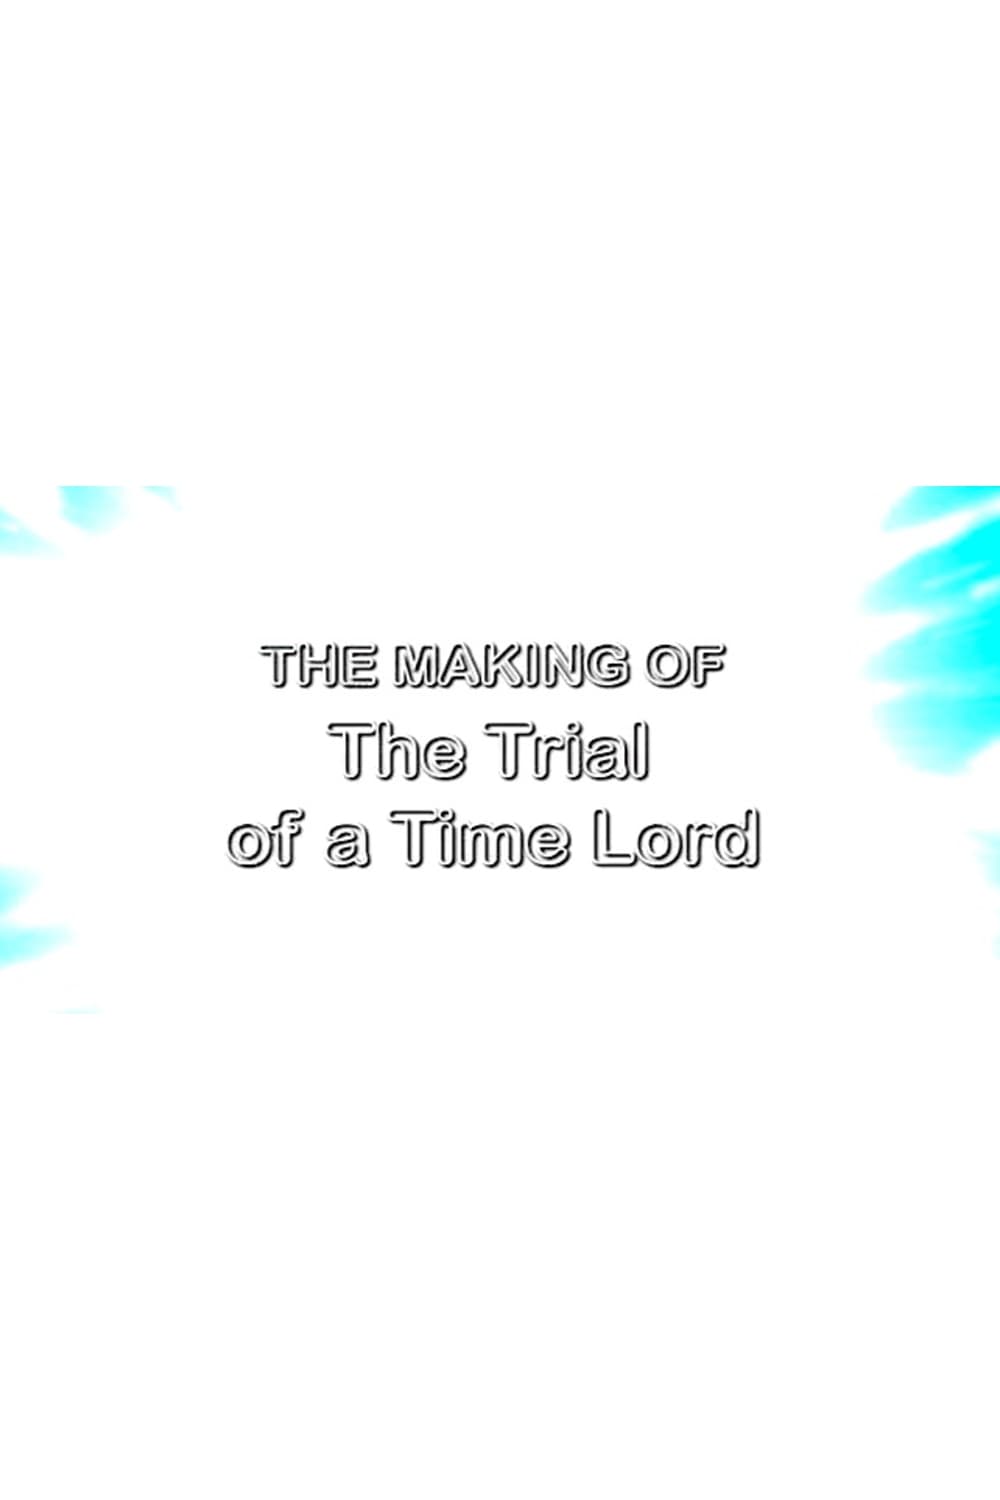 The Making of The Trial of a Time Lord (2008)